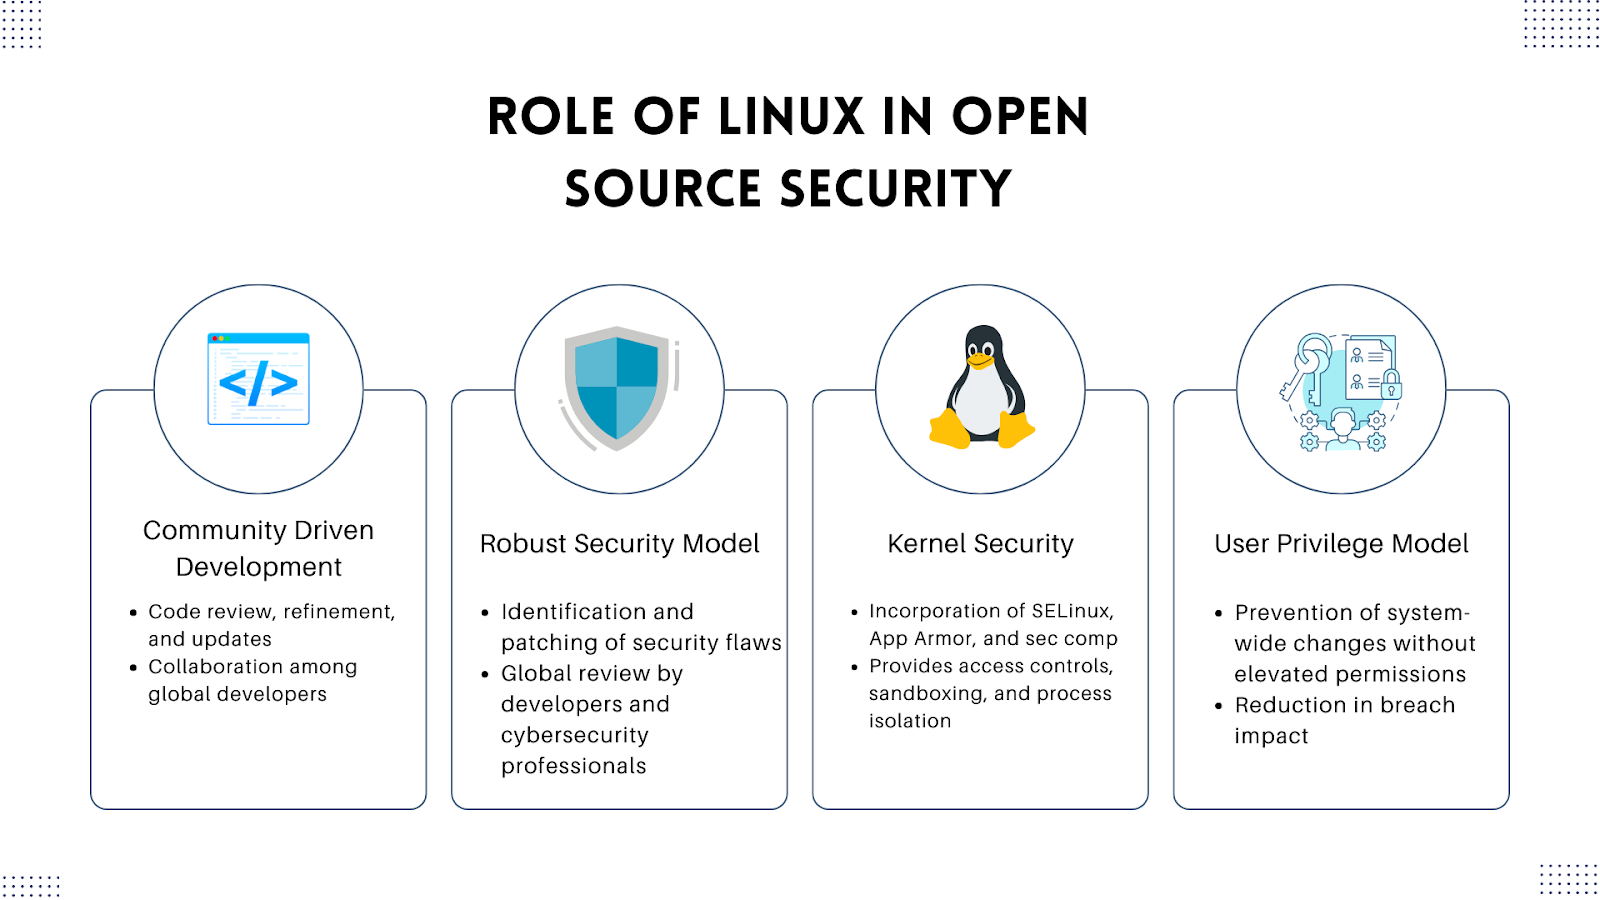 The Role of Linux in the Open-Source Security Ecosystem: Collaborative Solutions for a Safer Digital World